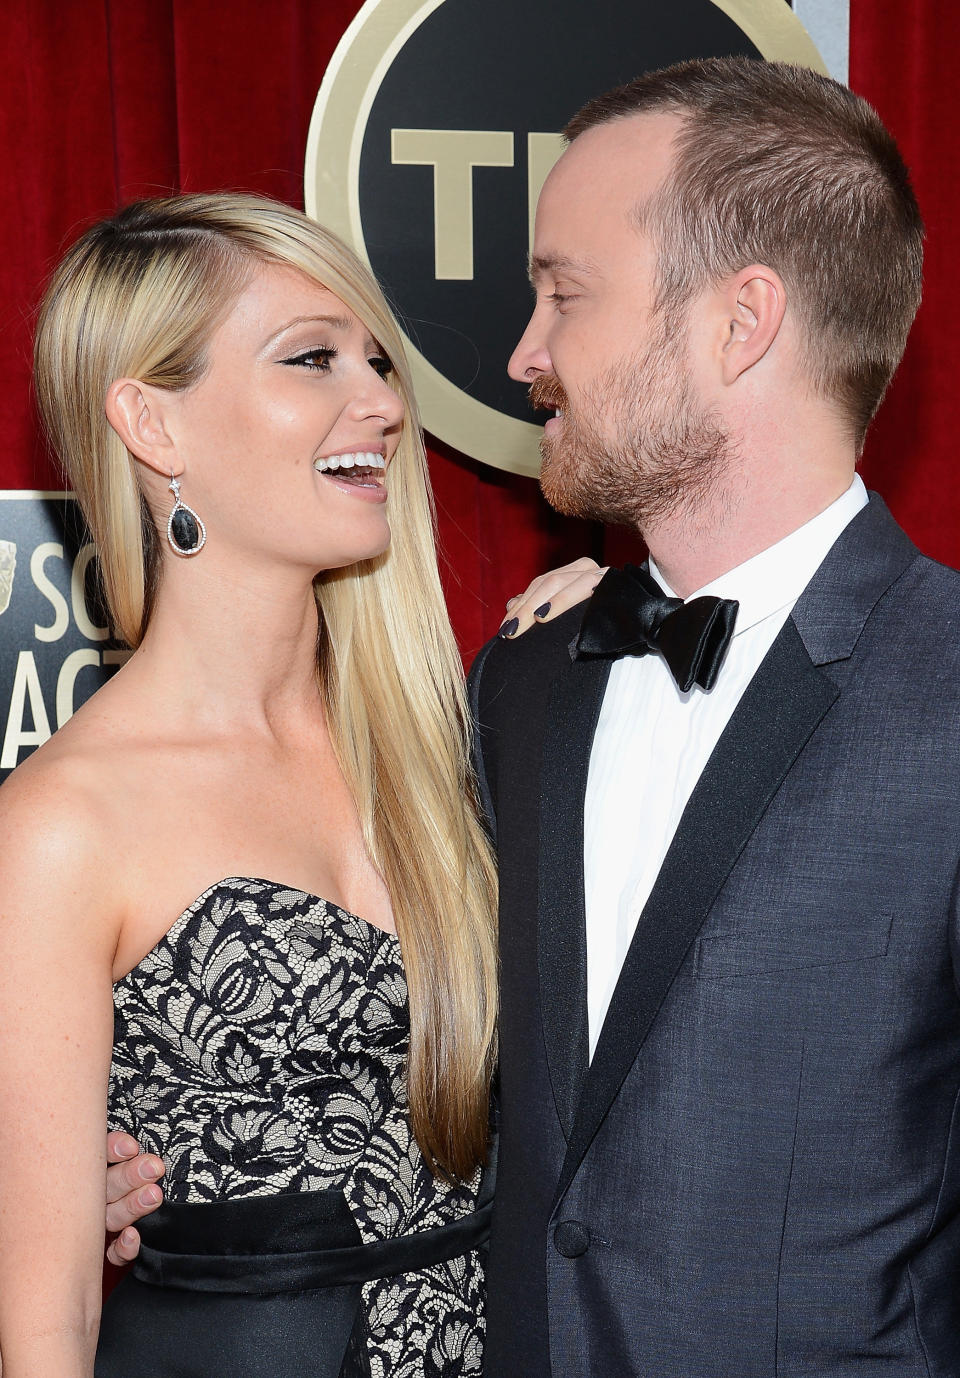 At the Emmys in September 2012, Aaron Paul snagged the award for Best Supporting Actor in a Drama Series. In his speech, he <a href="http://www.huffingtonpost.com/2012/09/24/aaron-paul-lauren-parsekian-dating-engaged-wedding-emmy-awards_n_1909300.html" target="_blank">thanked Lauren Parsekian</a>, saying "Thank you so much for looking at me the way that you do, you truly saved me."